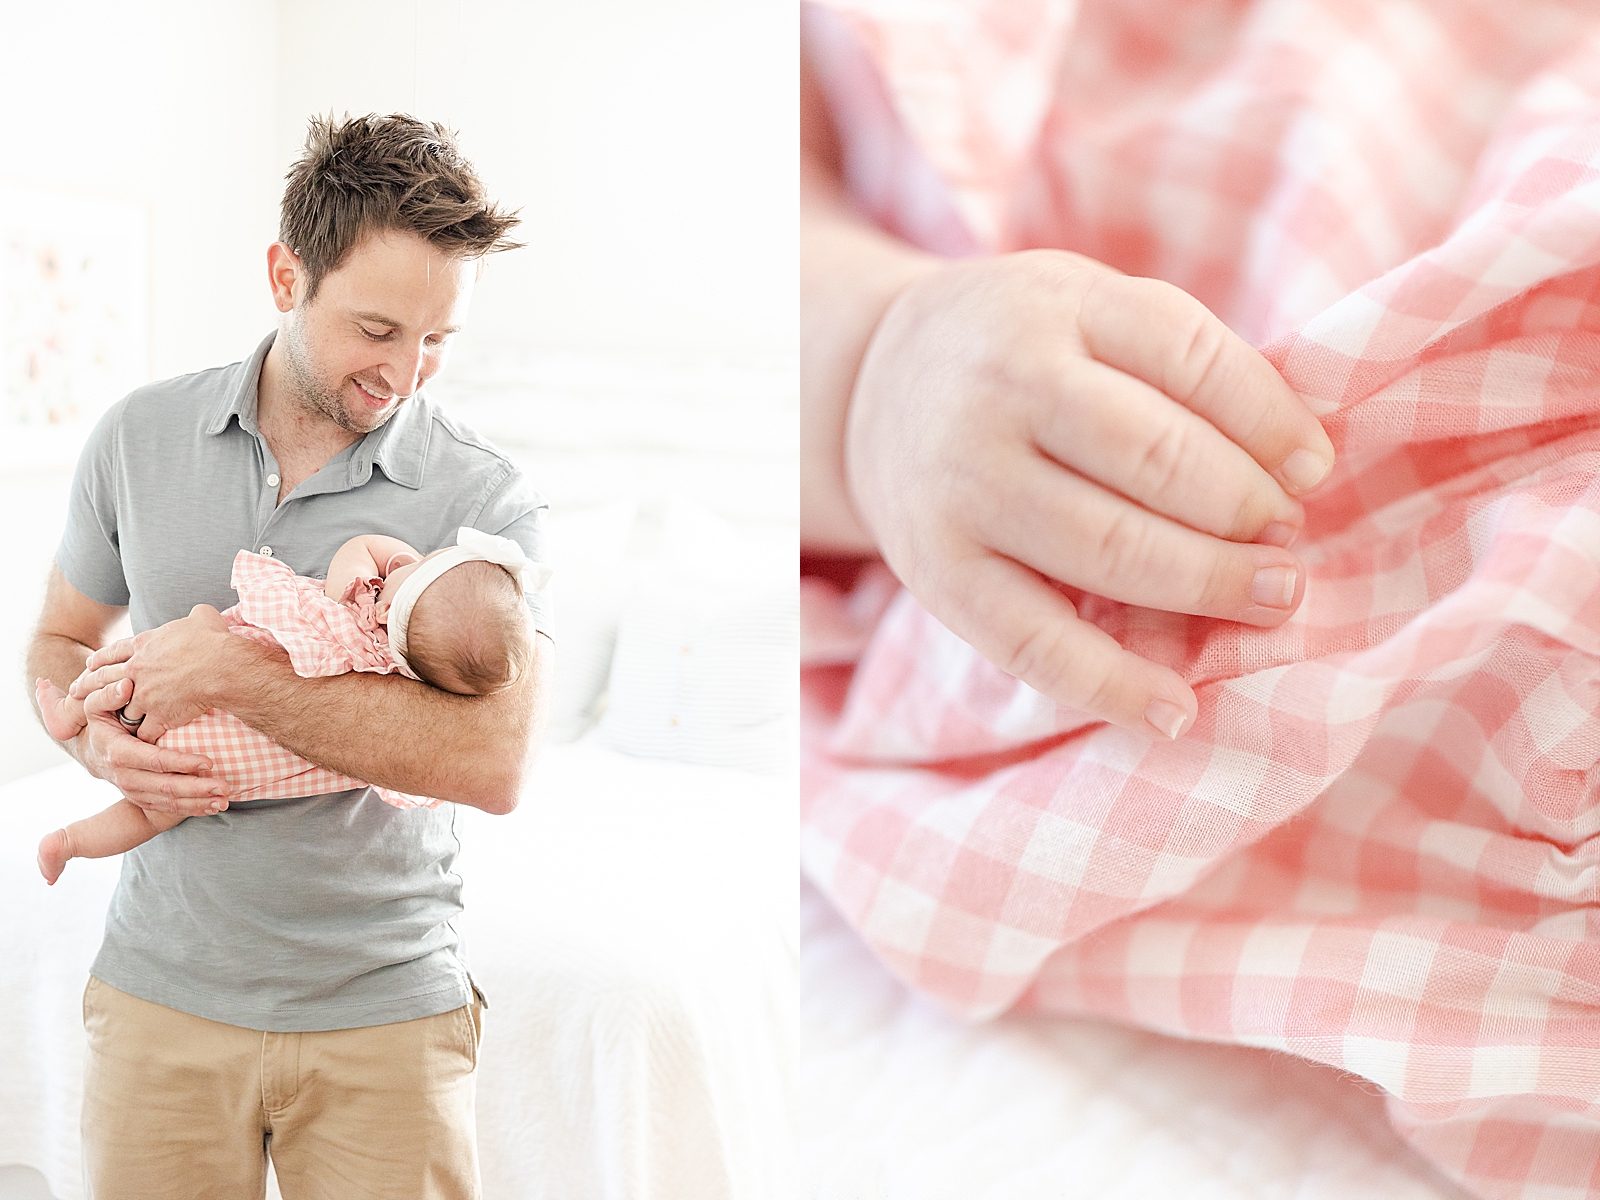 Lifestyle Newborn Photos dad holding miracle baby and close up shot of baby fingers